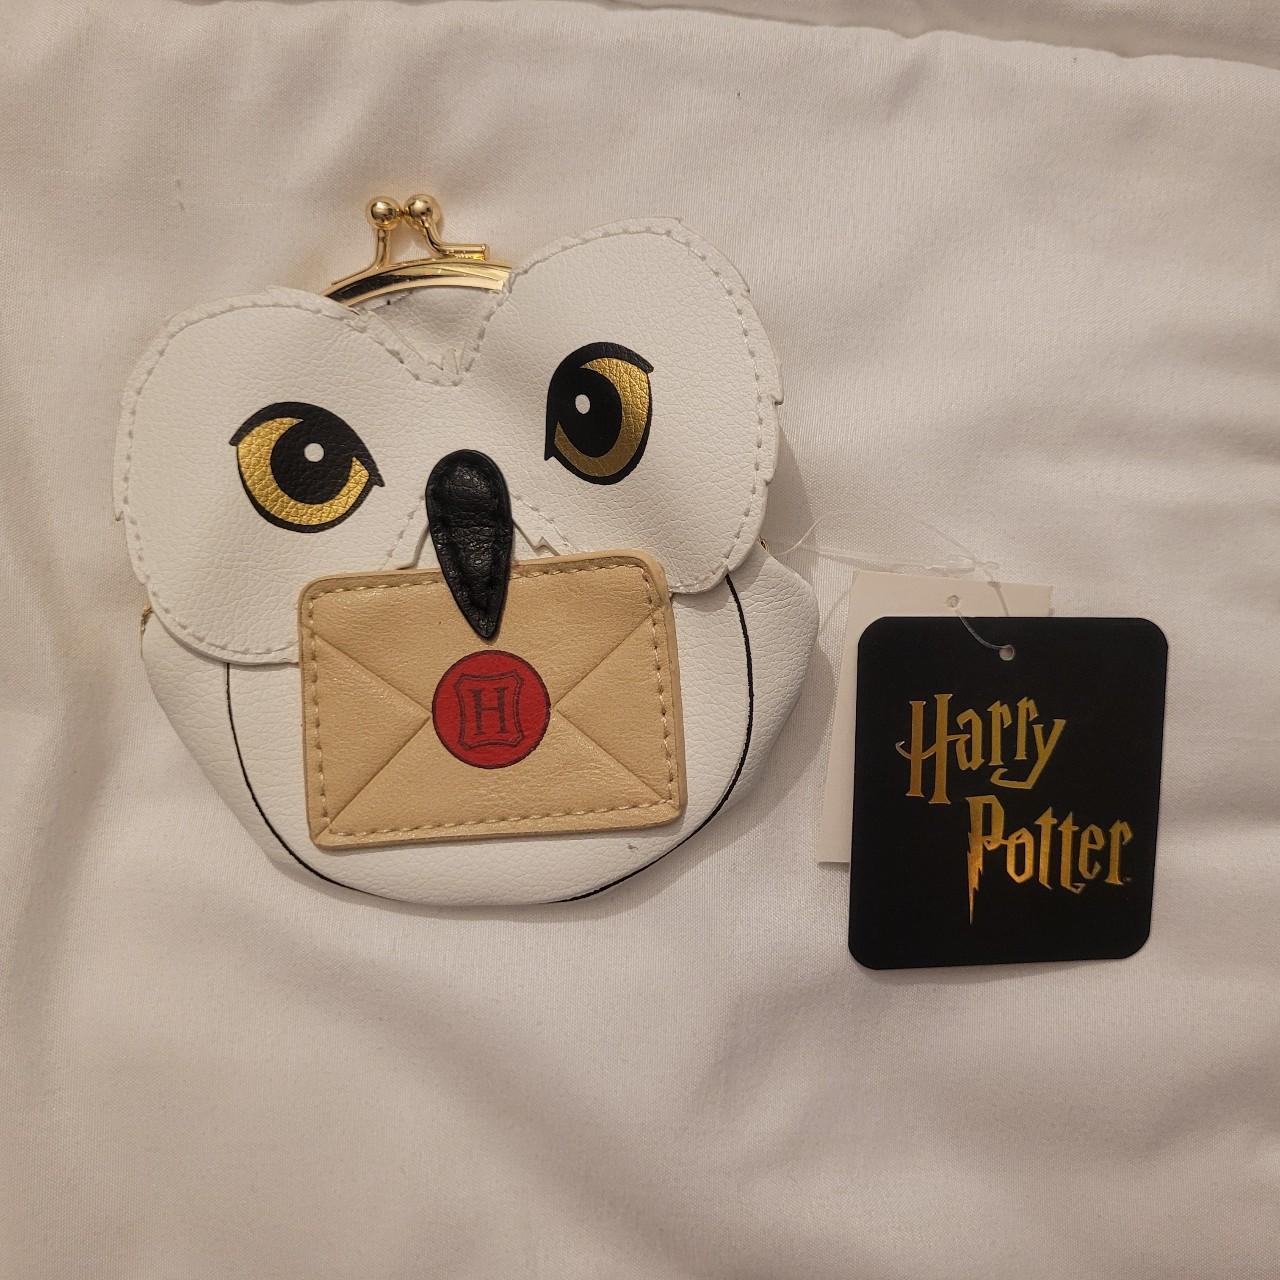 Harry Potter - Hogwarts Emblem Legend Cookie Hogwarts Coin Purse | Funko  Universe, Planet of comics, games and collecting.